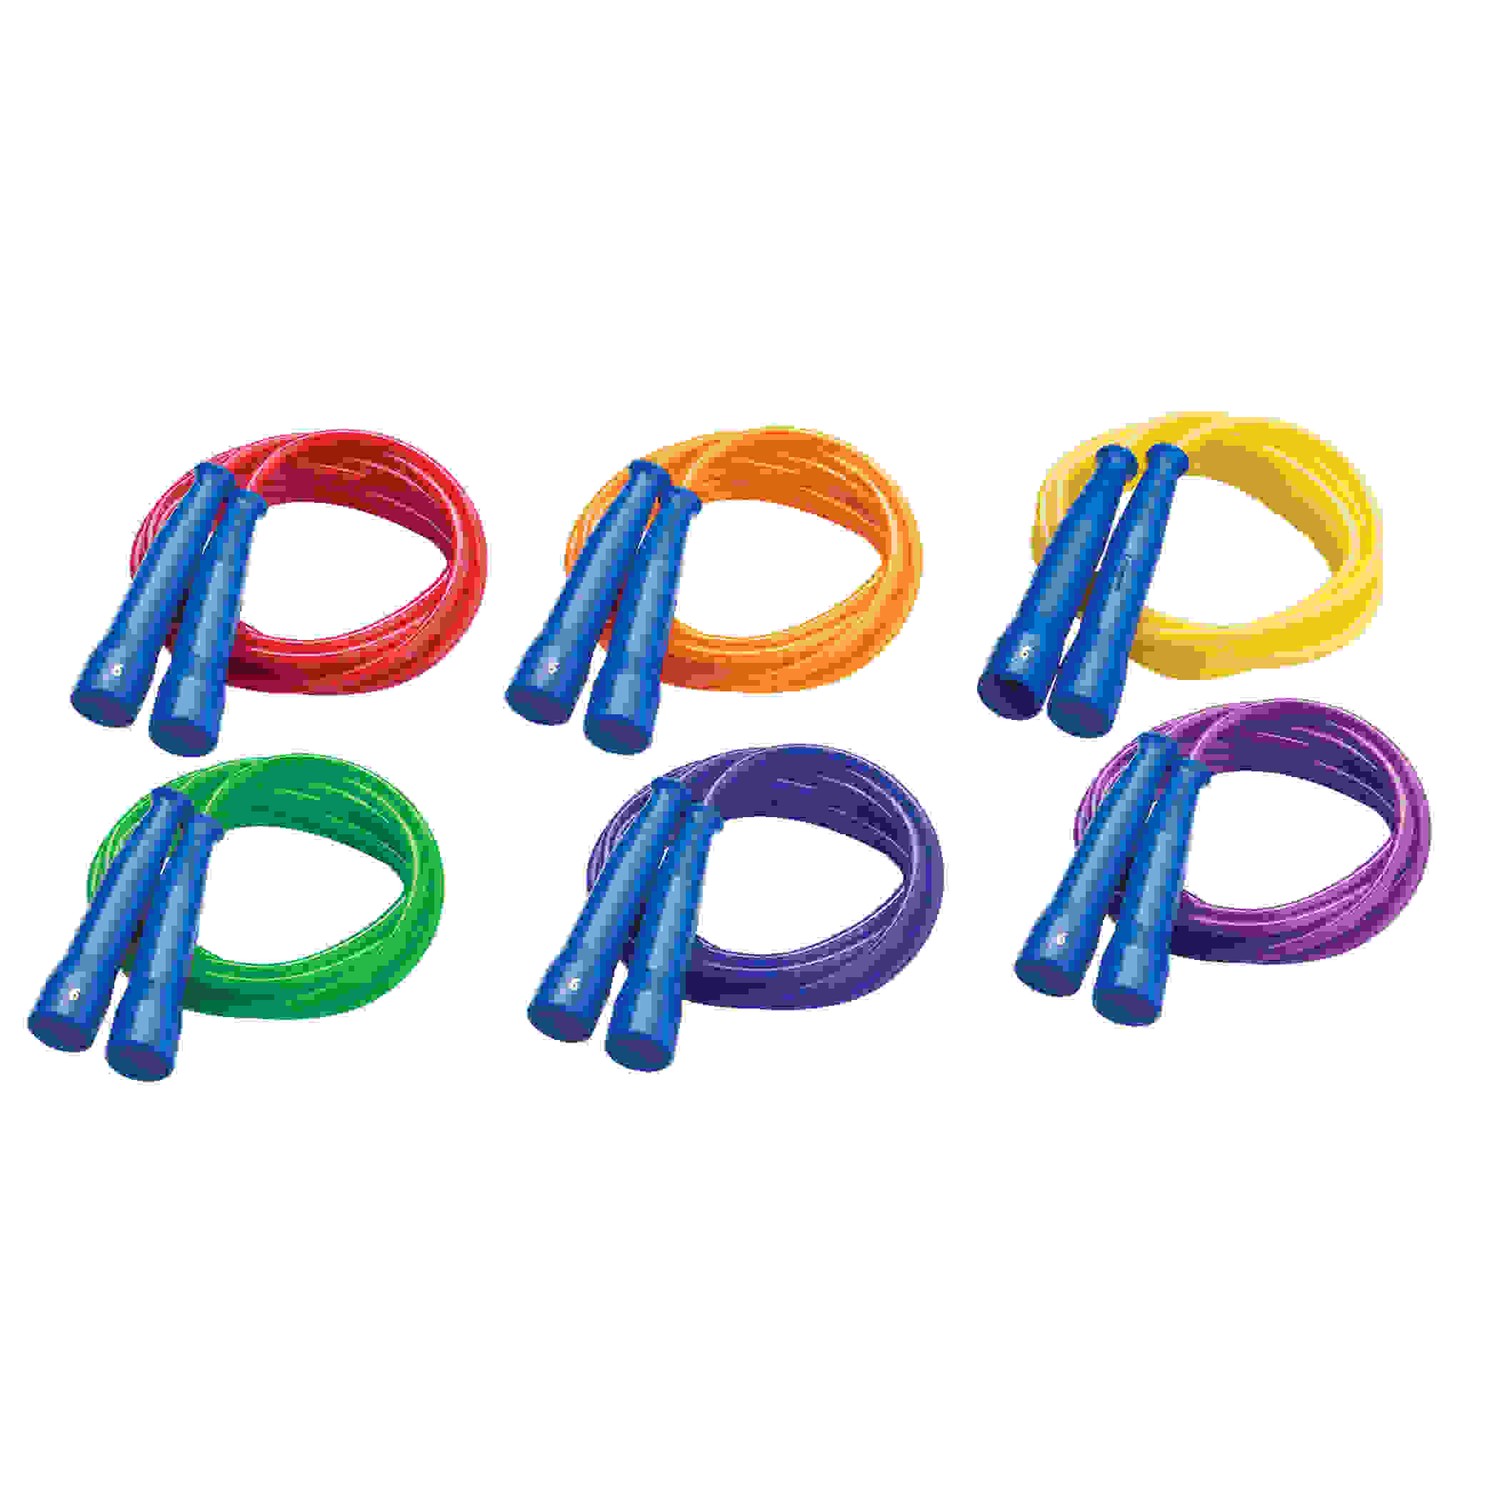 Licorice Speed Jump Rope, 9' with Blue Handles, Pack of 6